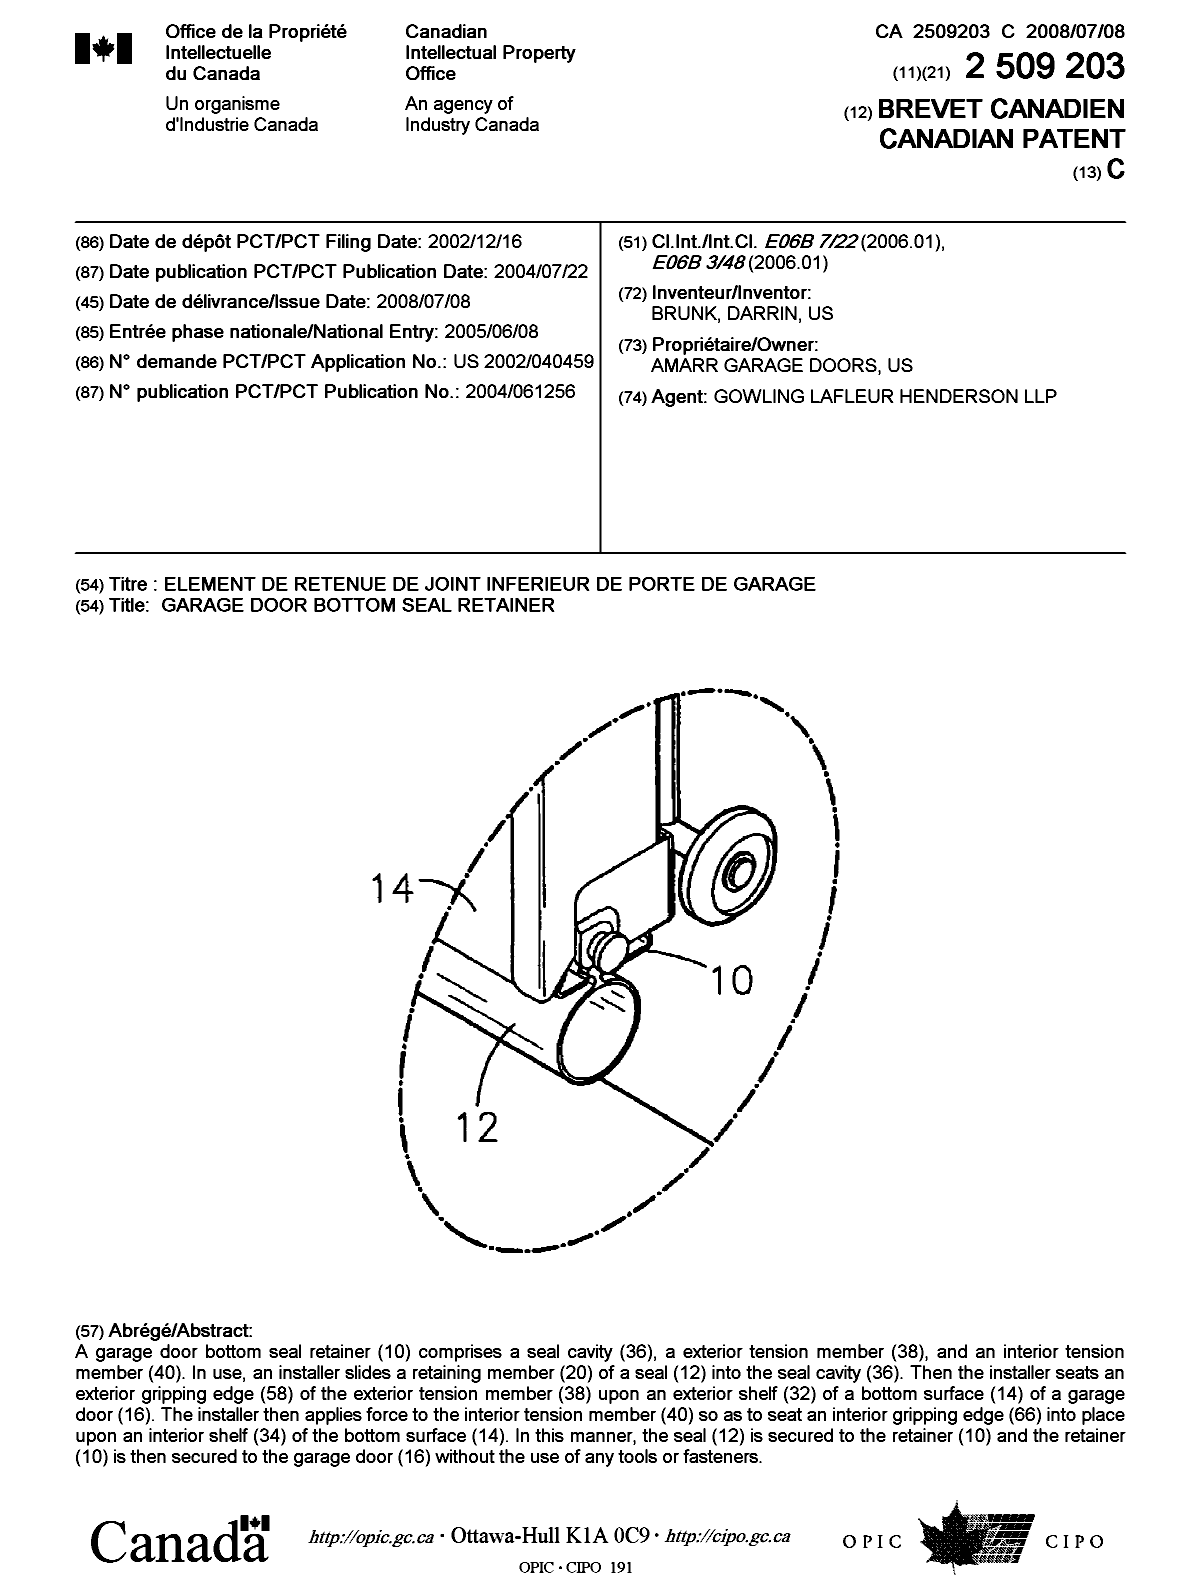 Canadian Patent Document 2509203. Cover Page 20080611. Image 1 of 1